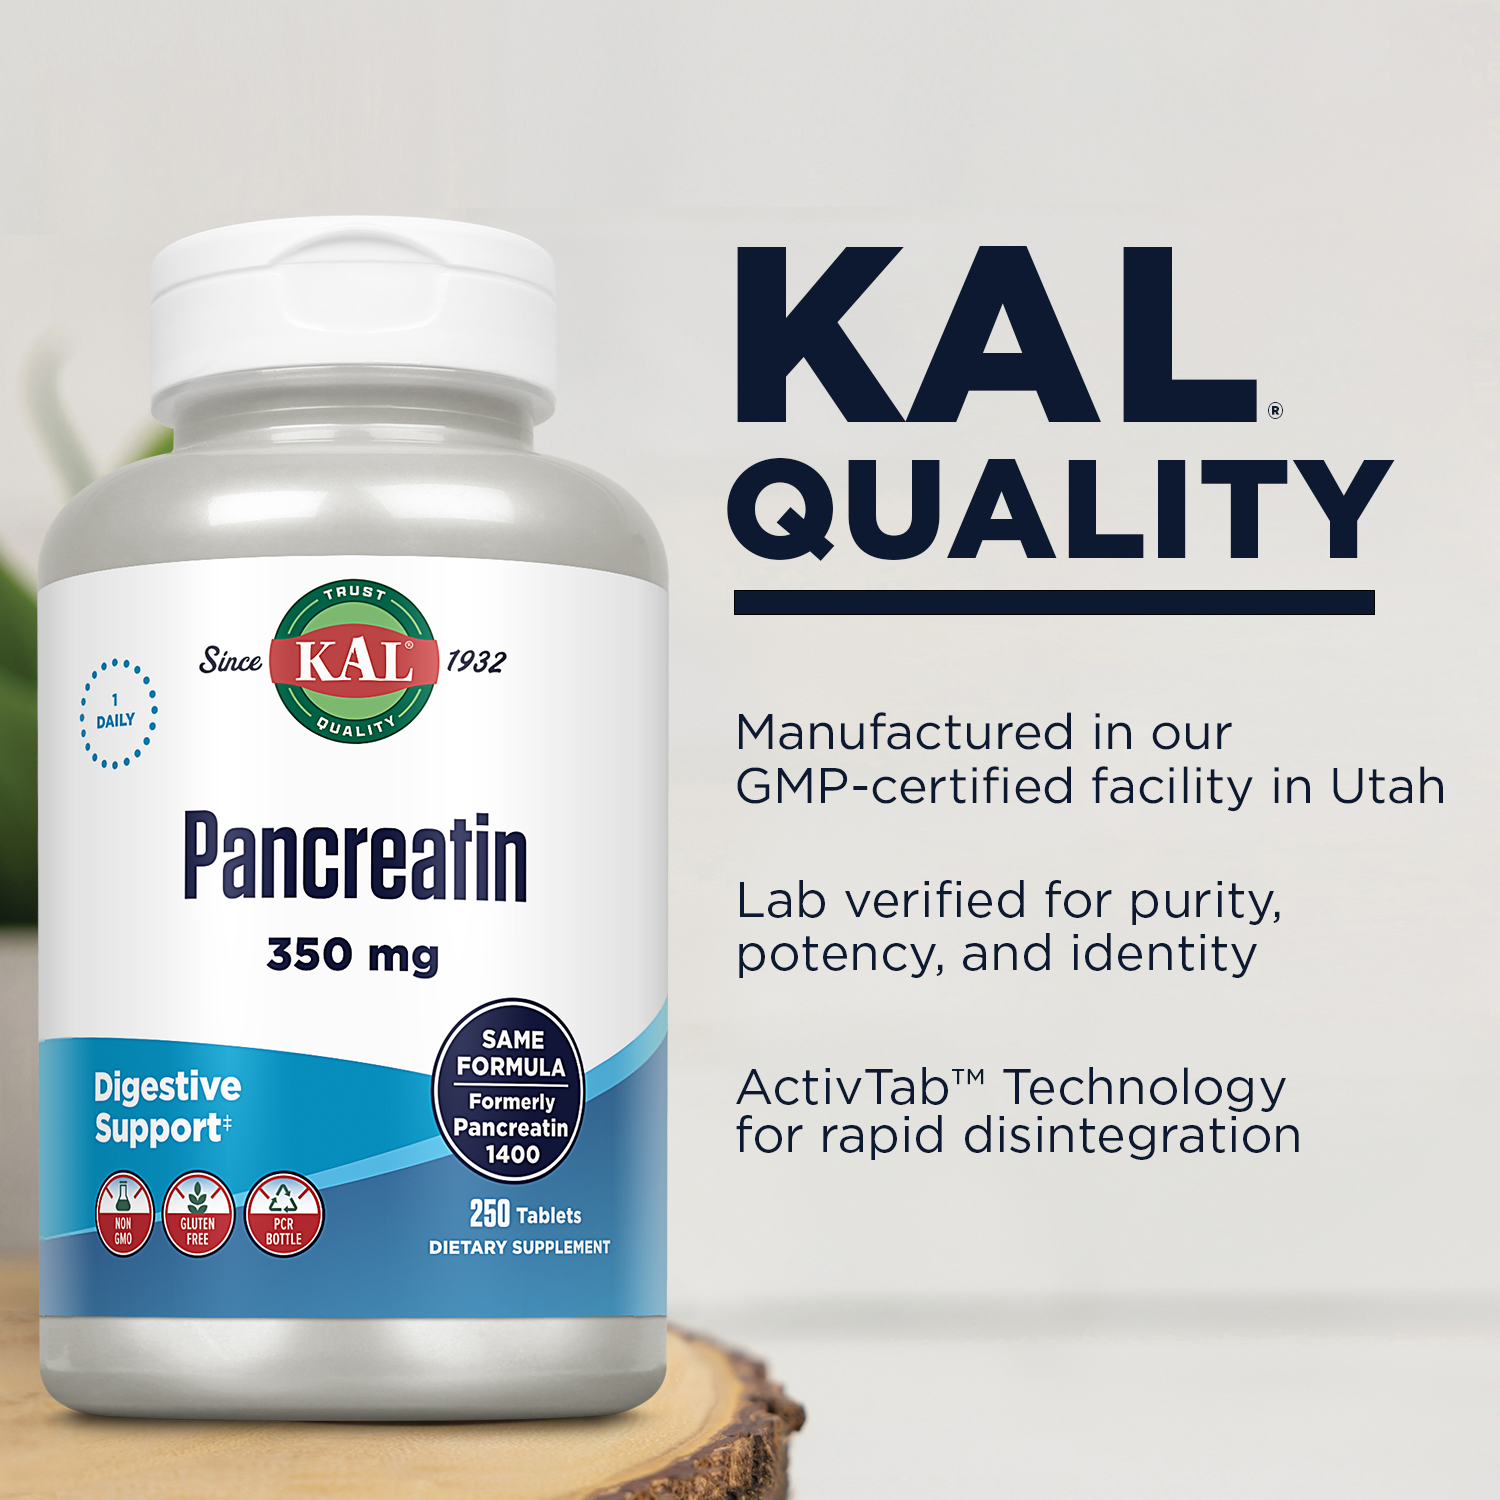 KAL Pancreatin 1400 | Pancreatic Enzymes Amylase, Protease & Lipase to Help Support Healthy Digestion of Carbs, Fats & Proteins | 250 Tablets - image 5 of 7